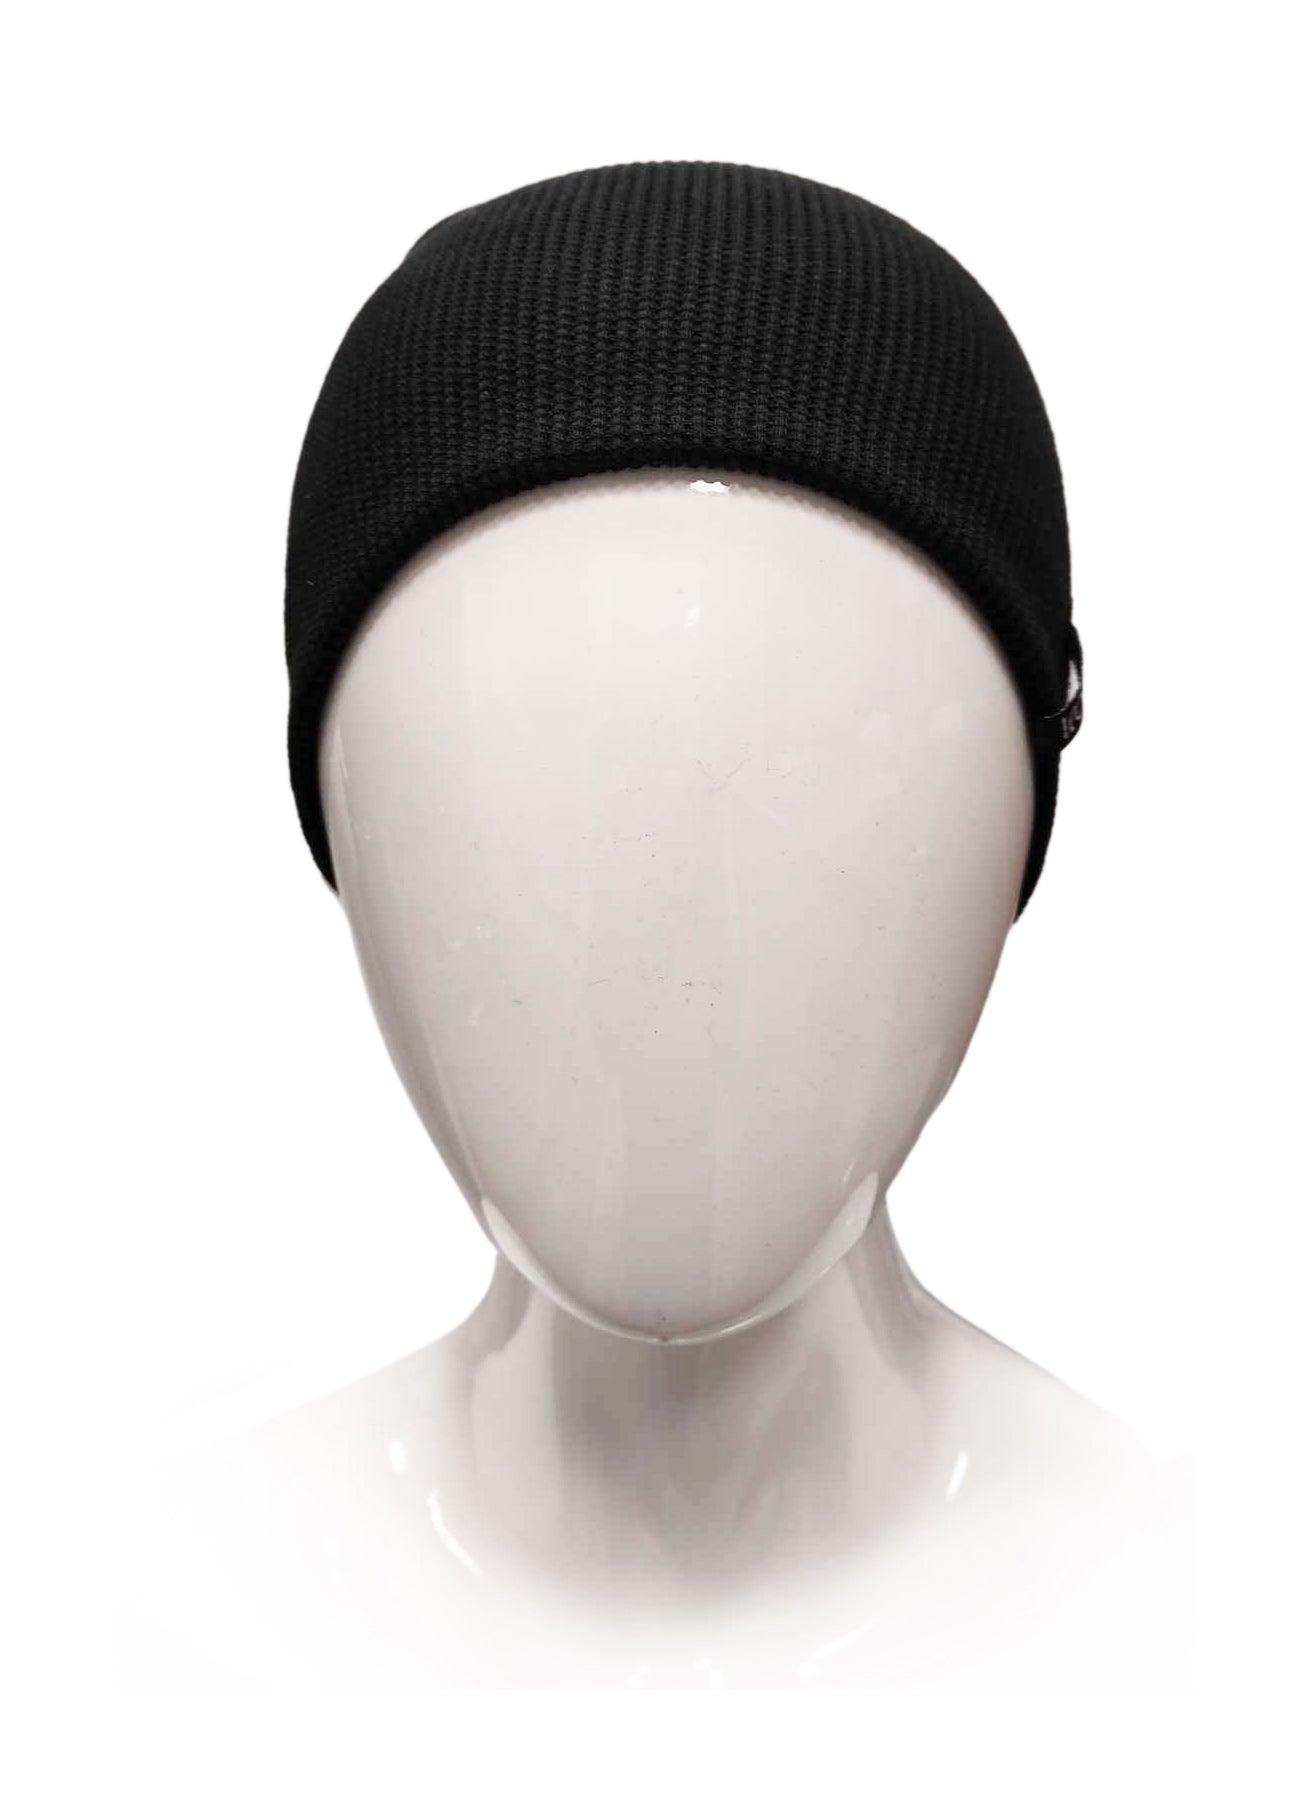 Unisex beanie/Tuque hat Brooklyn - Front view - Black 